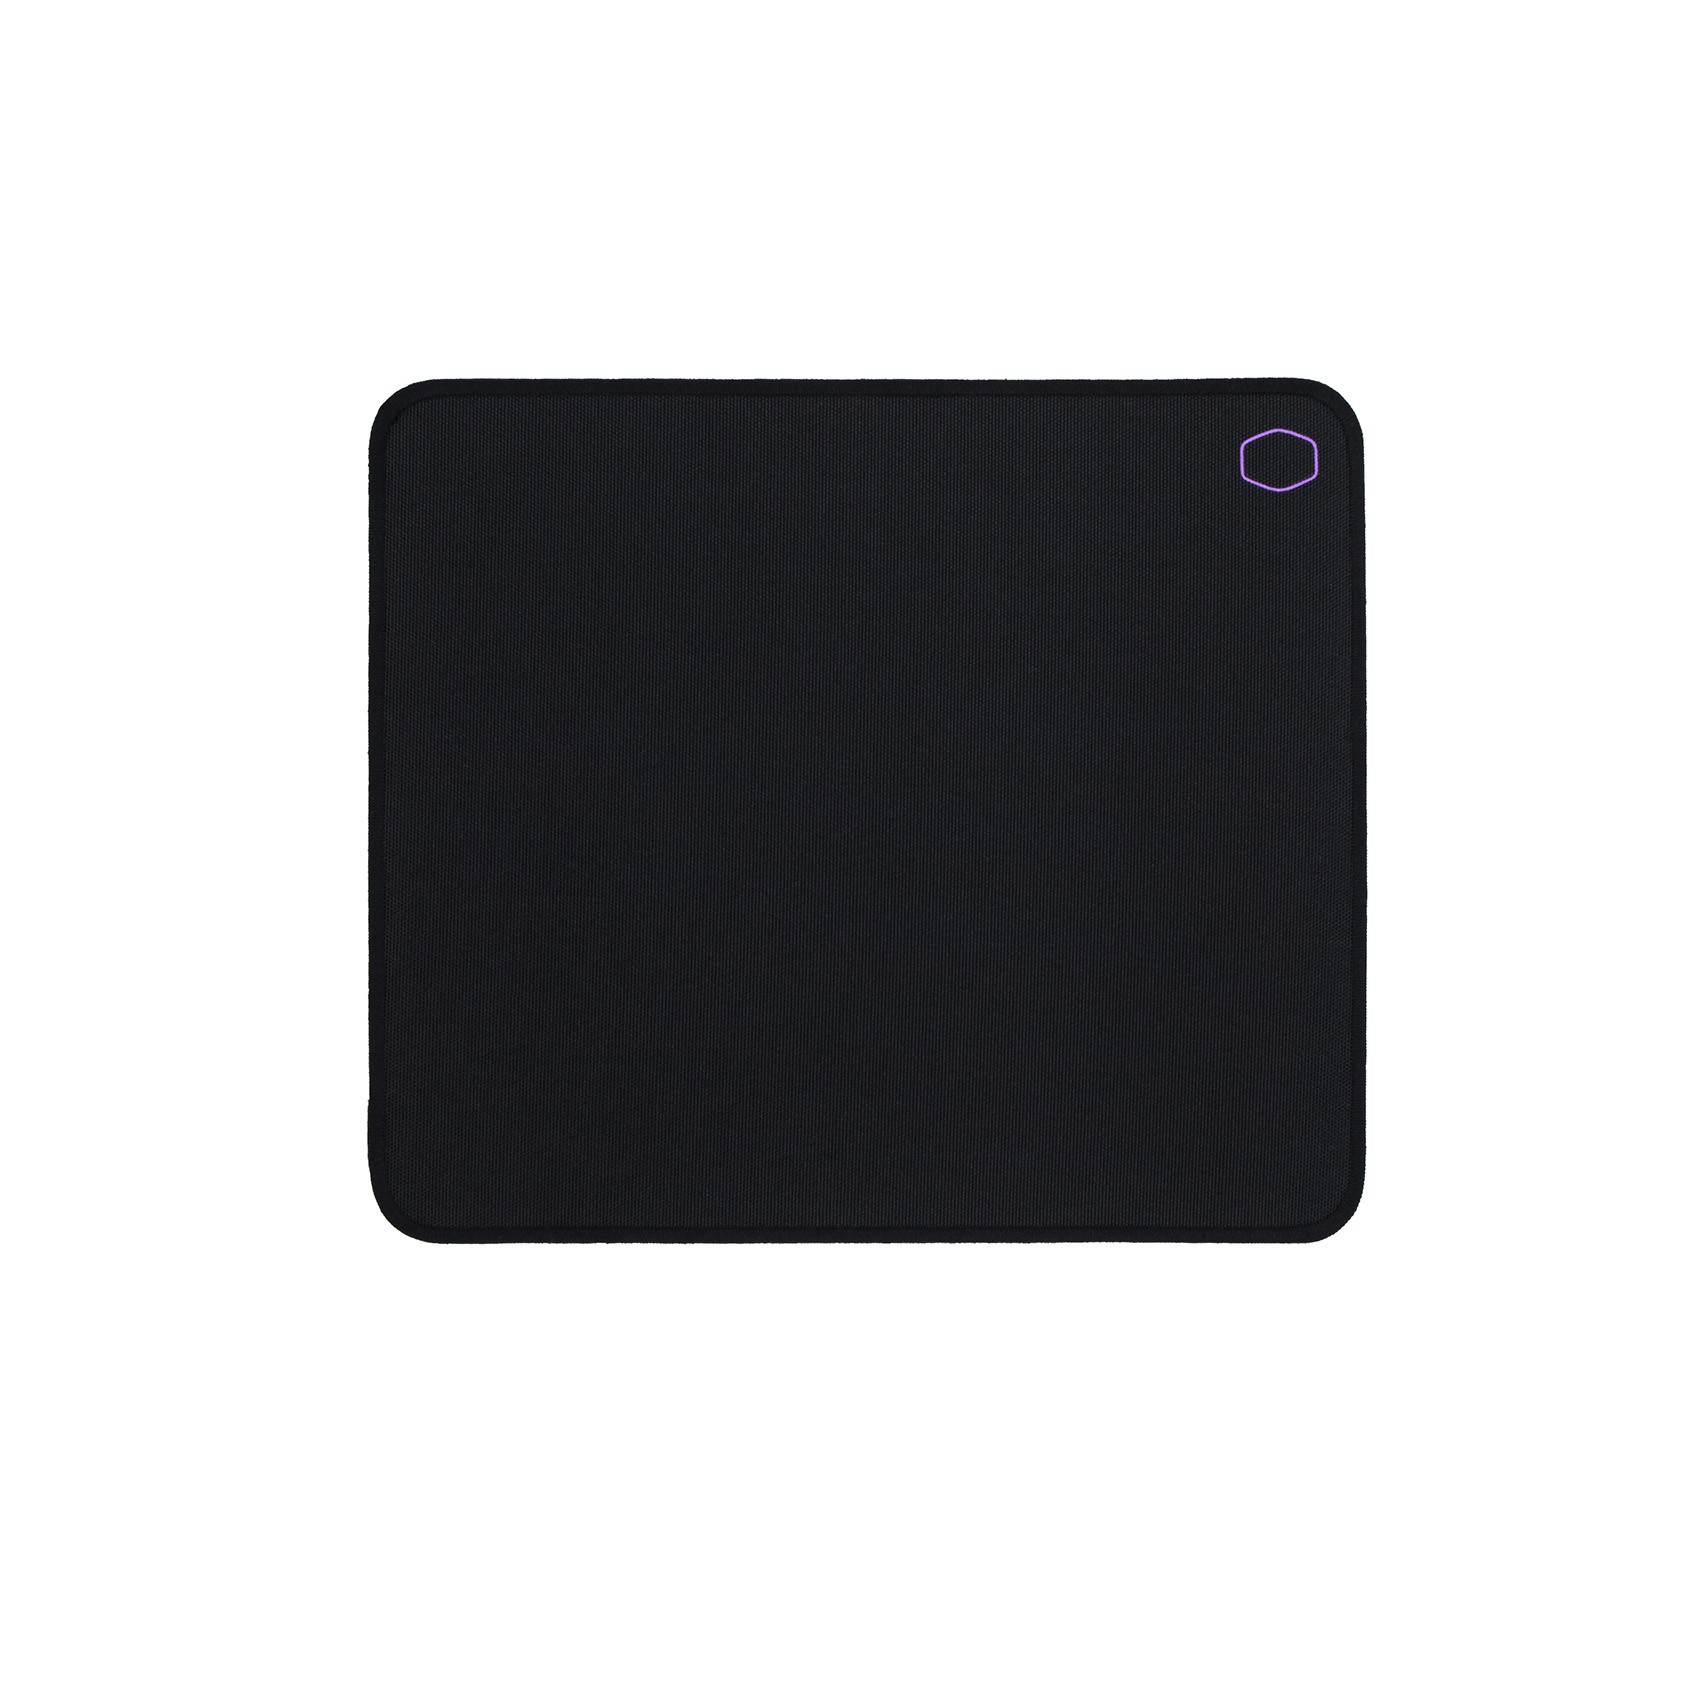 COOLER MASTER MASTERACCESSORY MP510 L BLACK 450X350MM MOUSE PAD